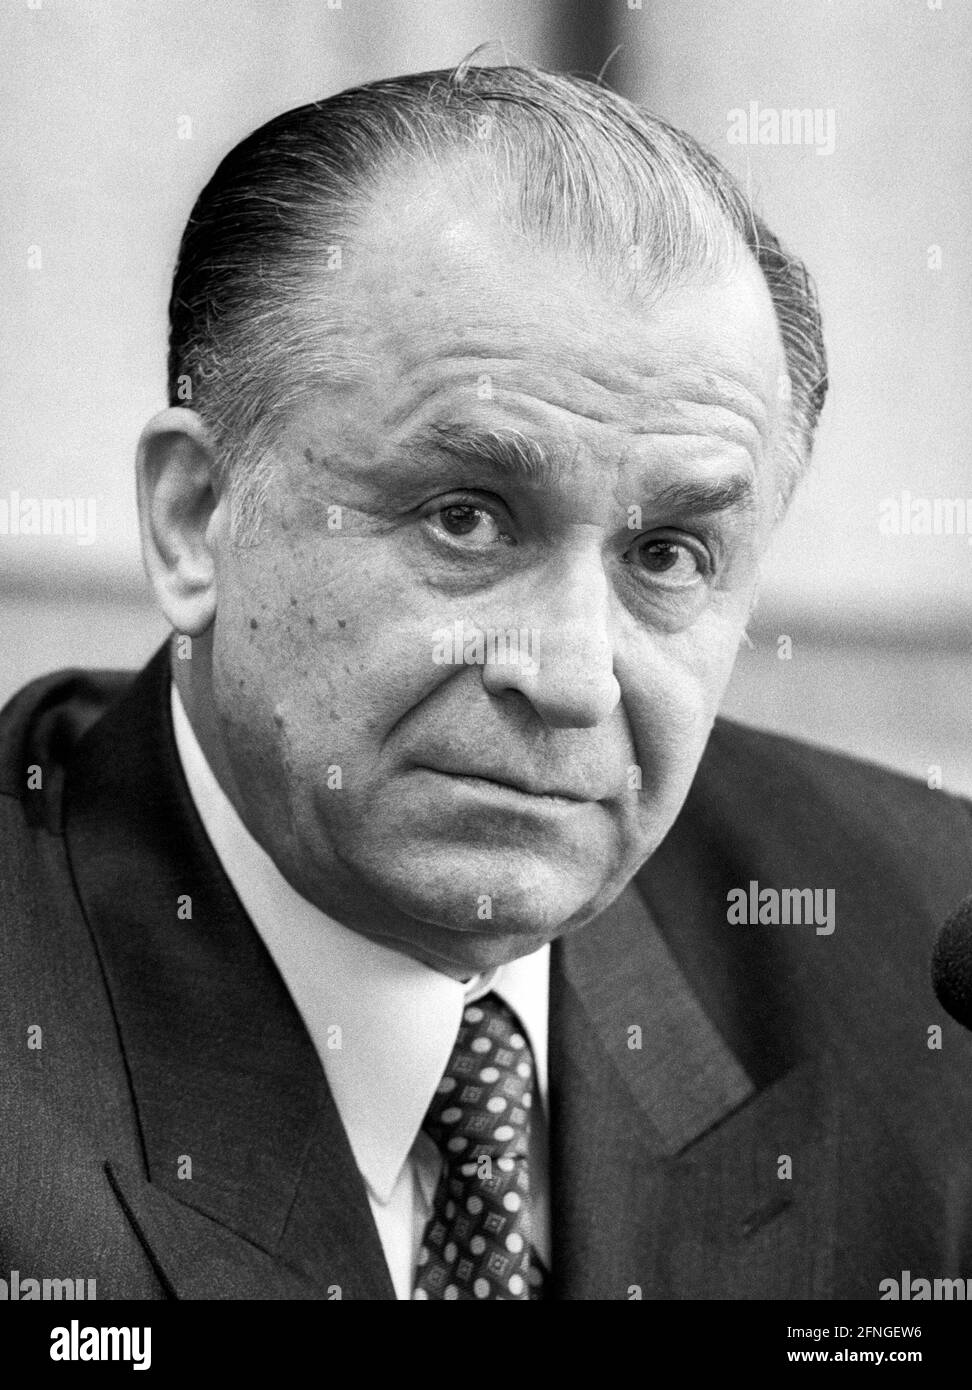 Humanistic Postage censorship Ion iliescu Black and White Stock Photos & Images - Alamy